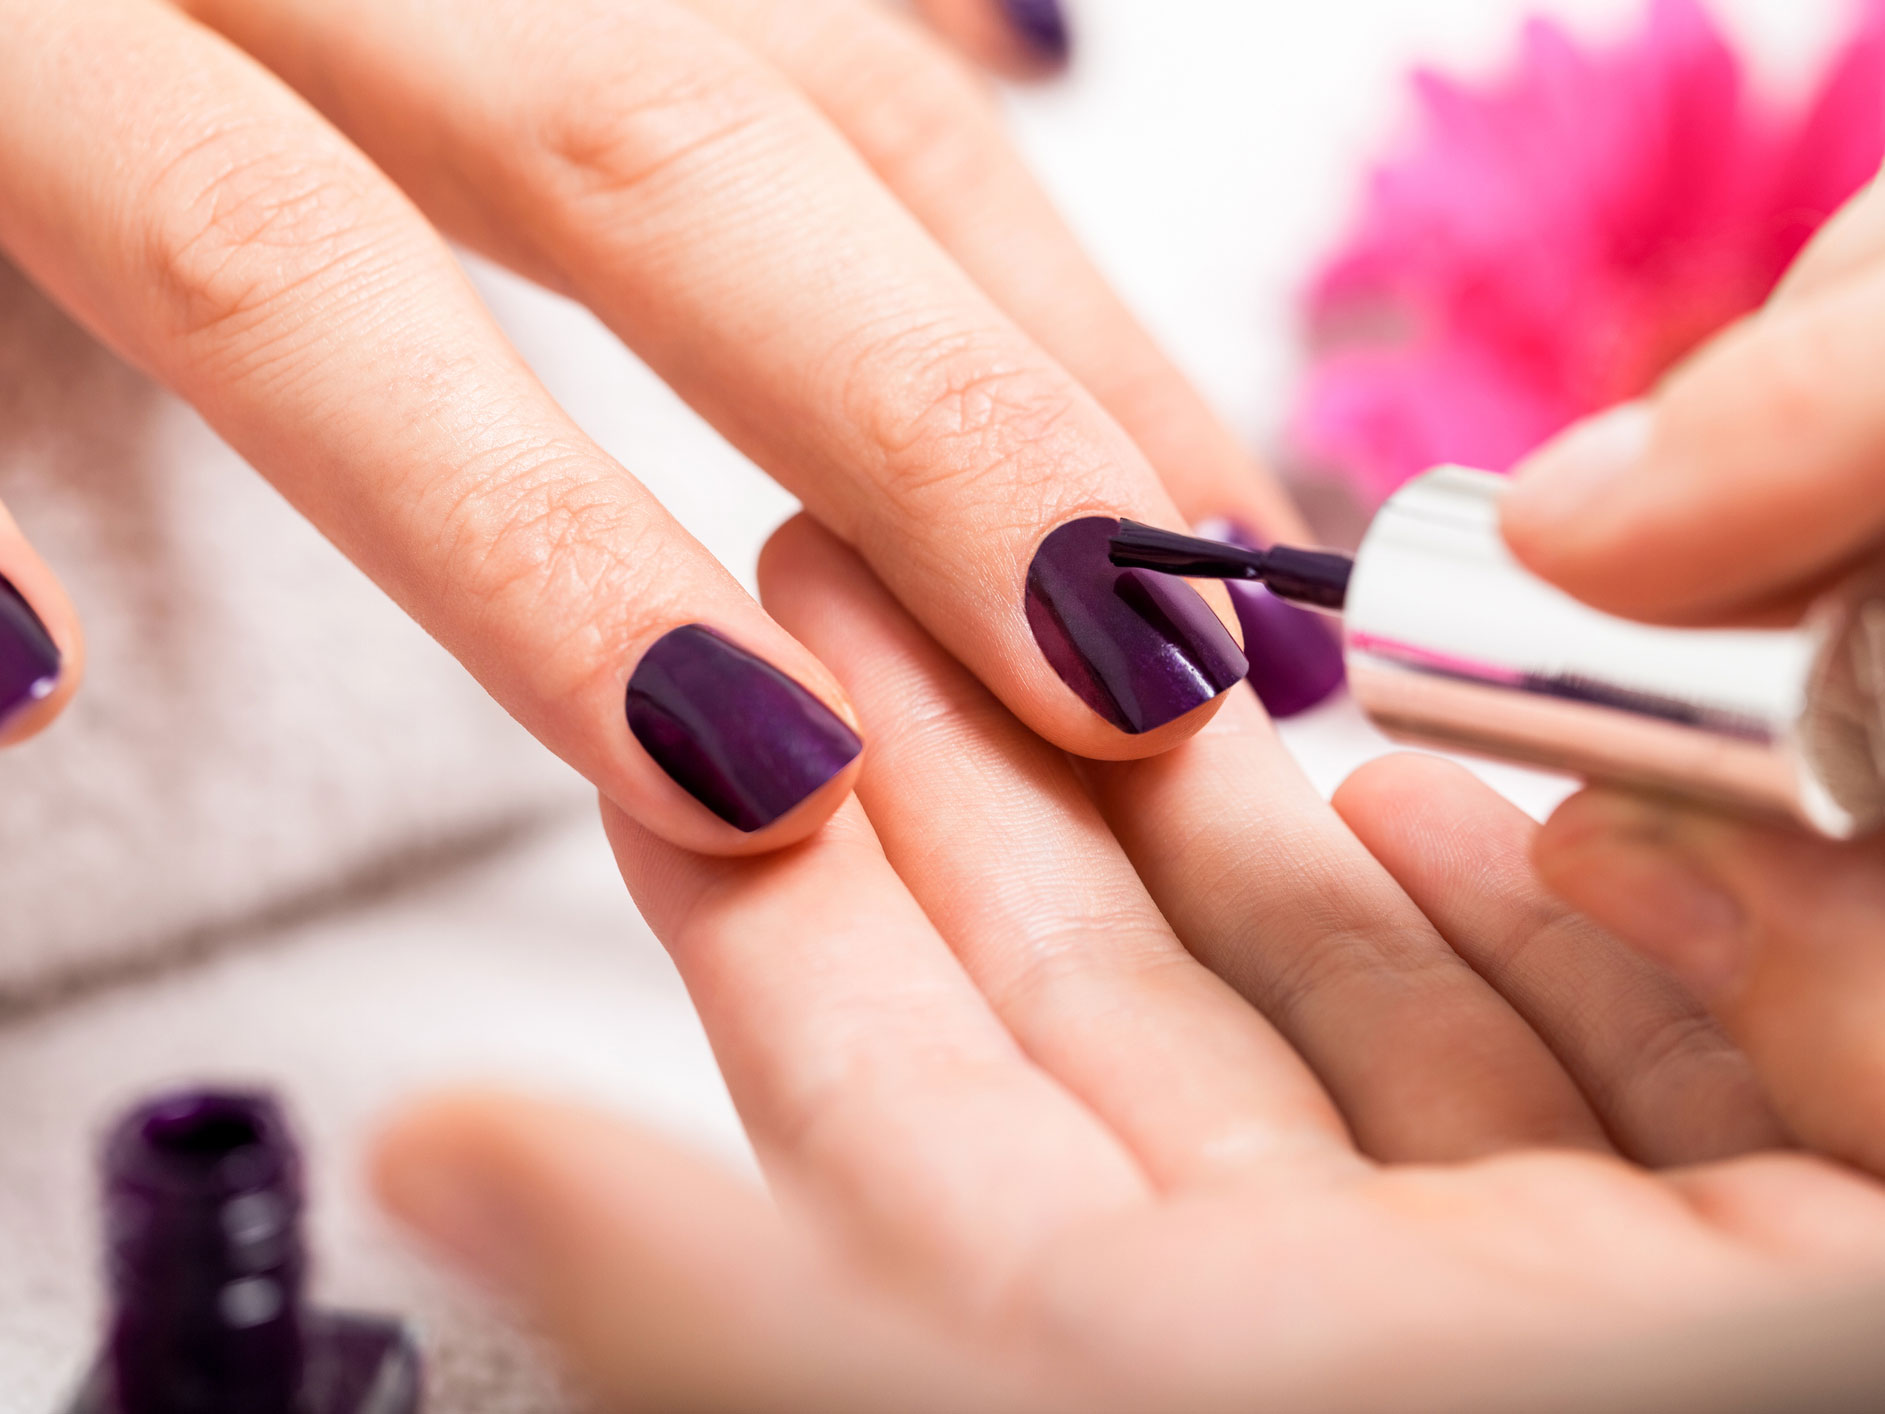 The triple-toxin danger in your perfectly polished nails